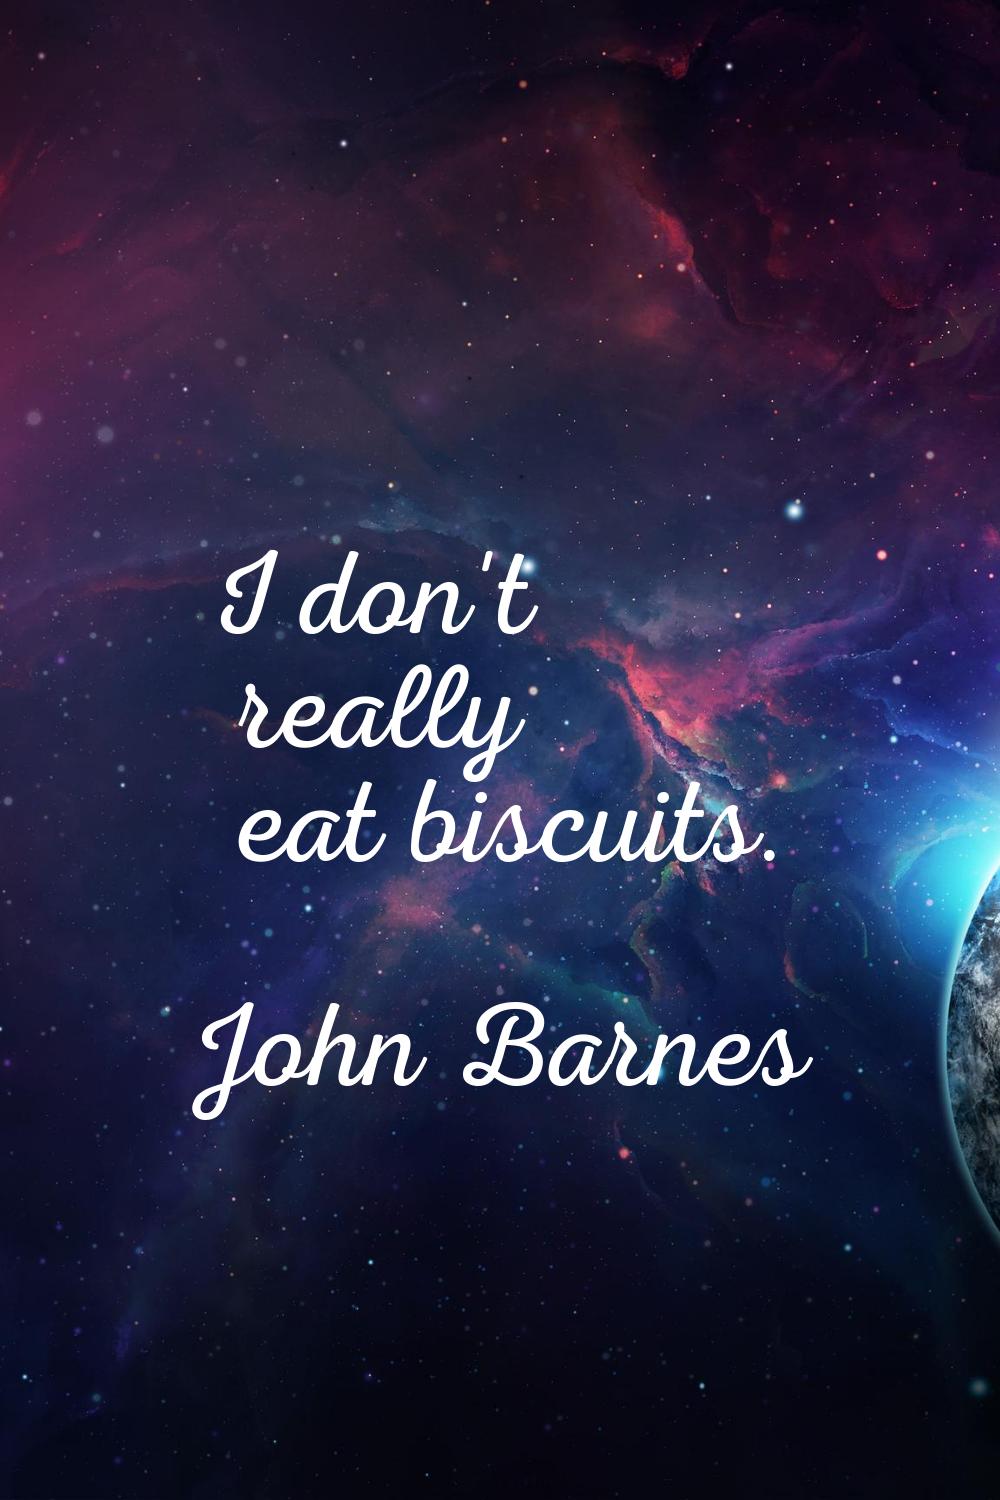 I don't really eat biscuits.